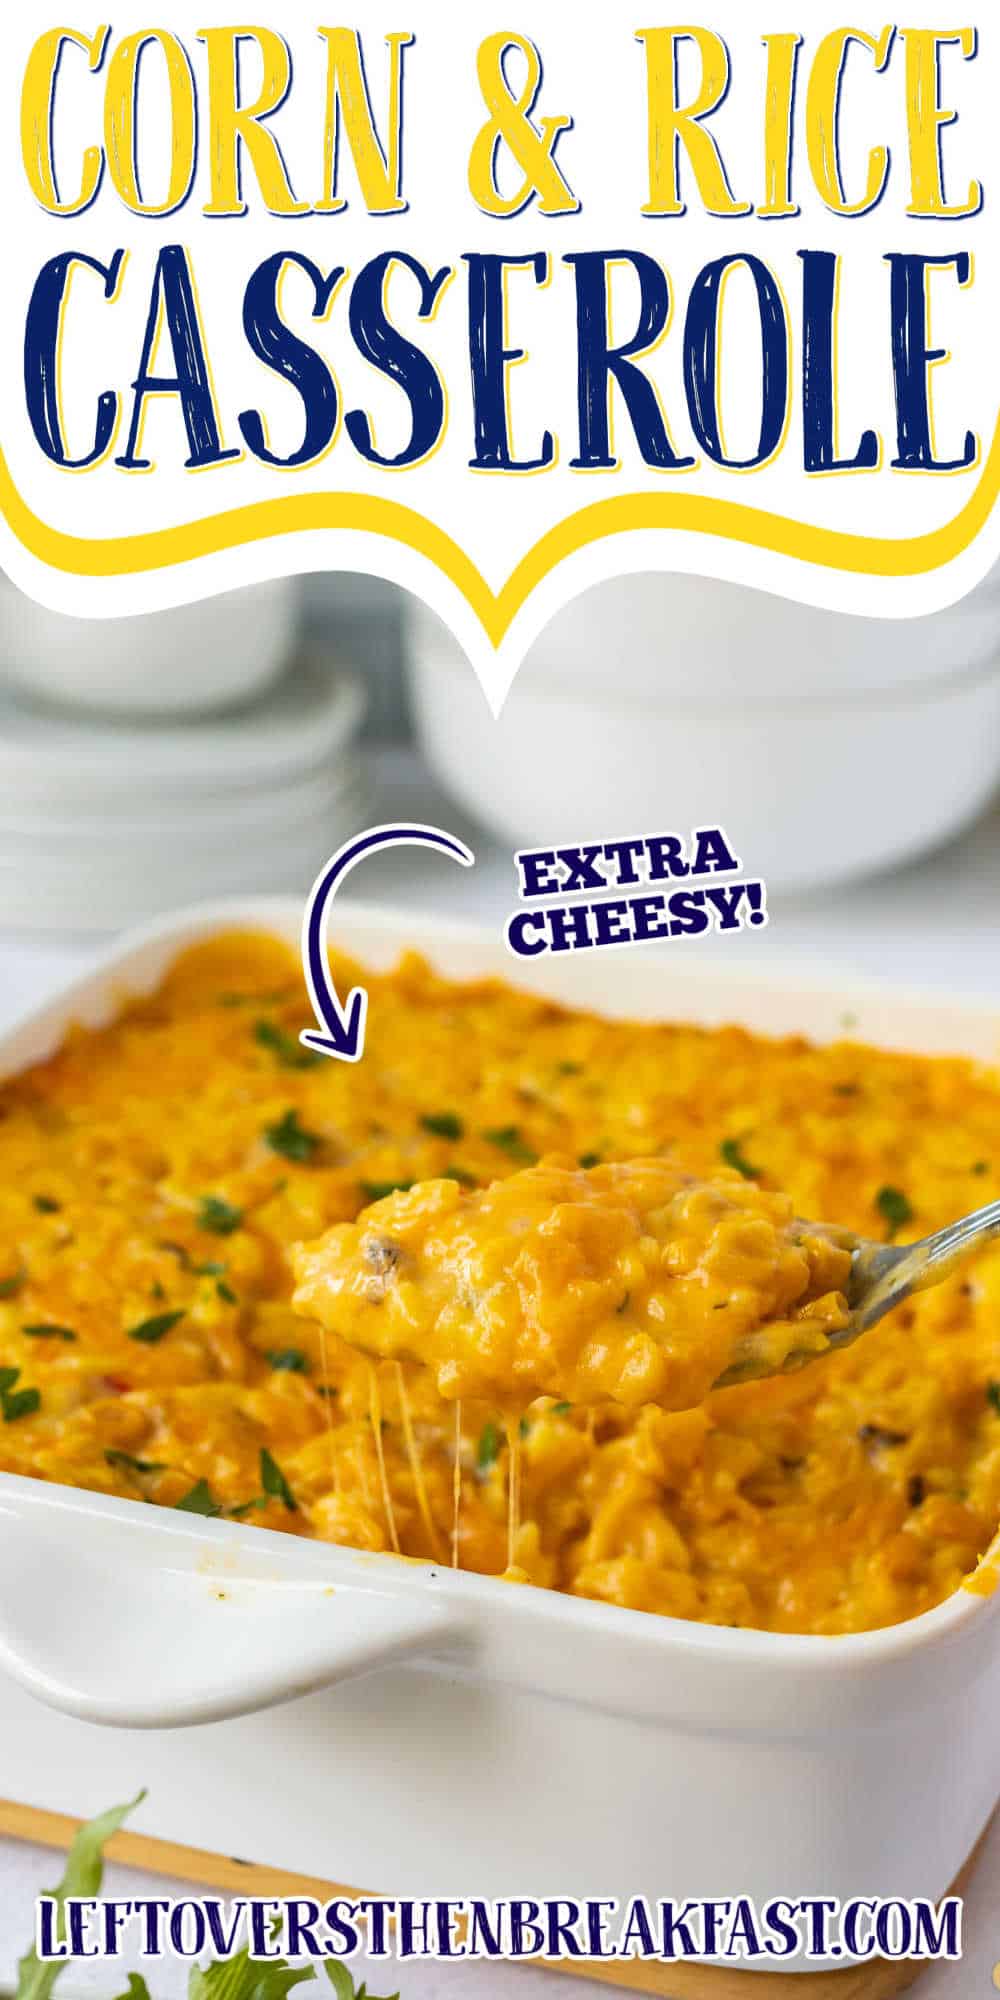 spoon of cheesy corn and rice casserole with text "extra cheesy"